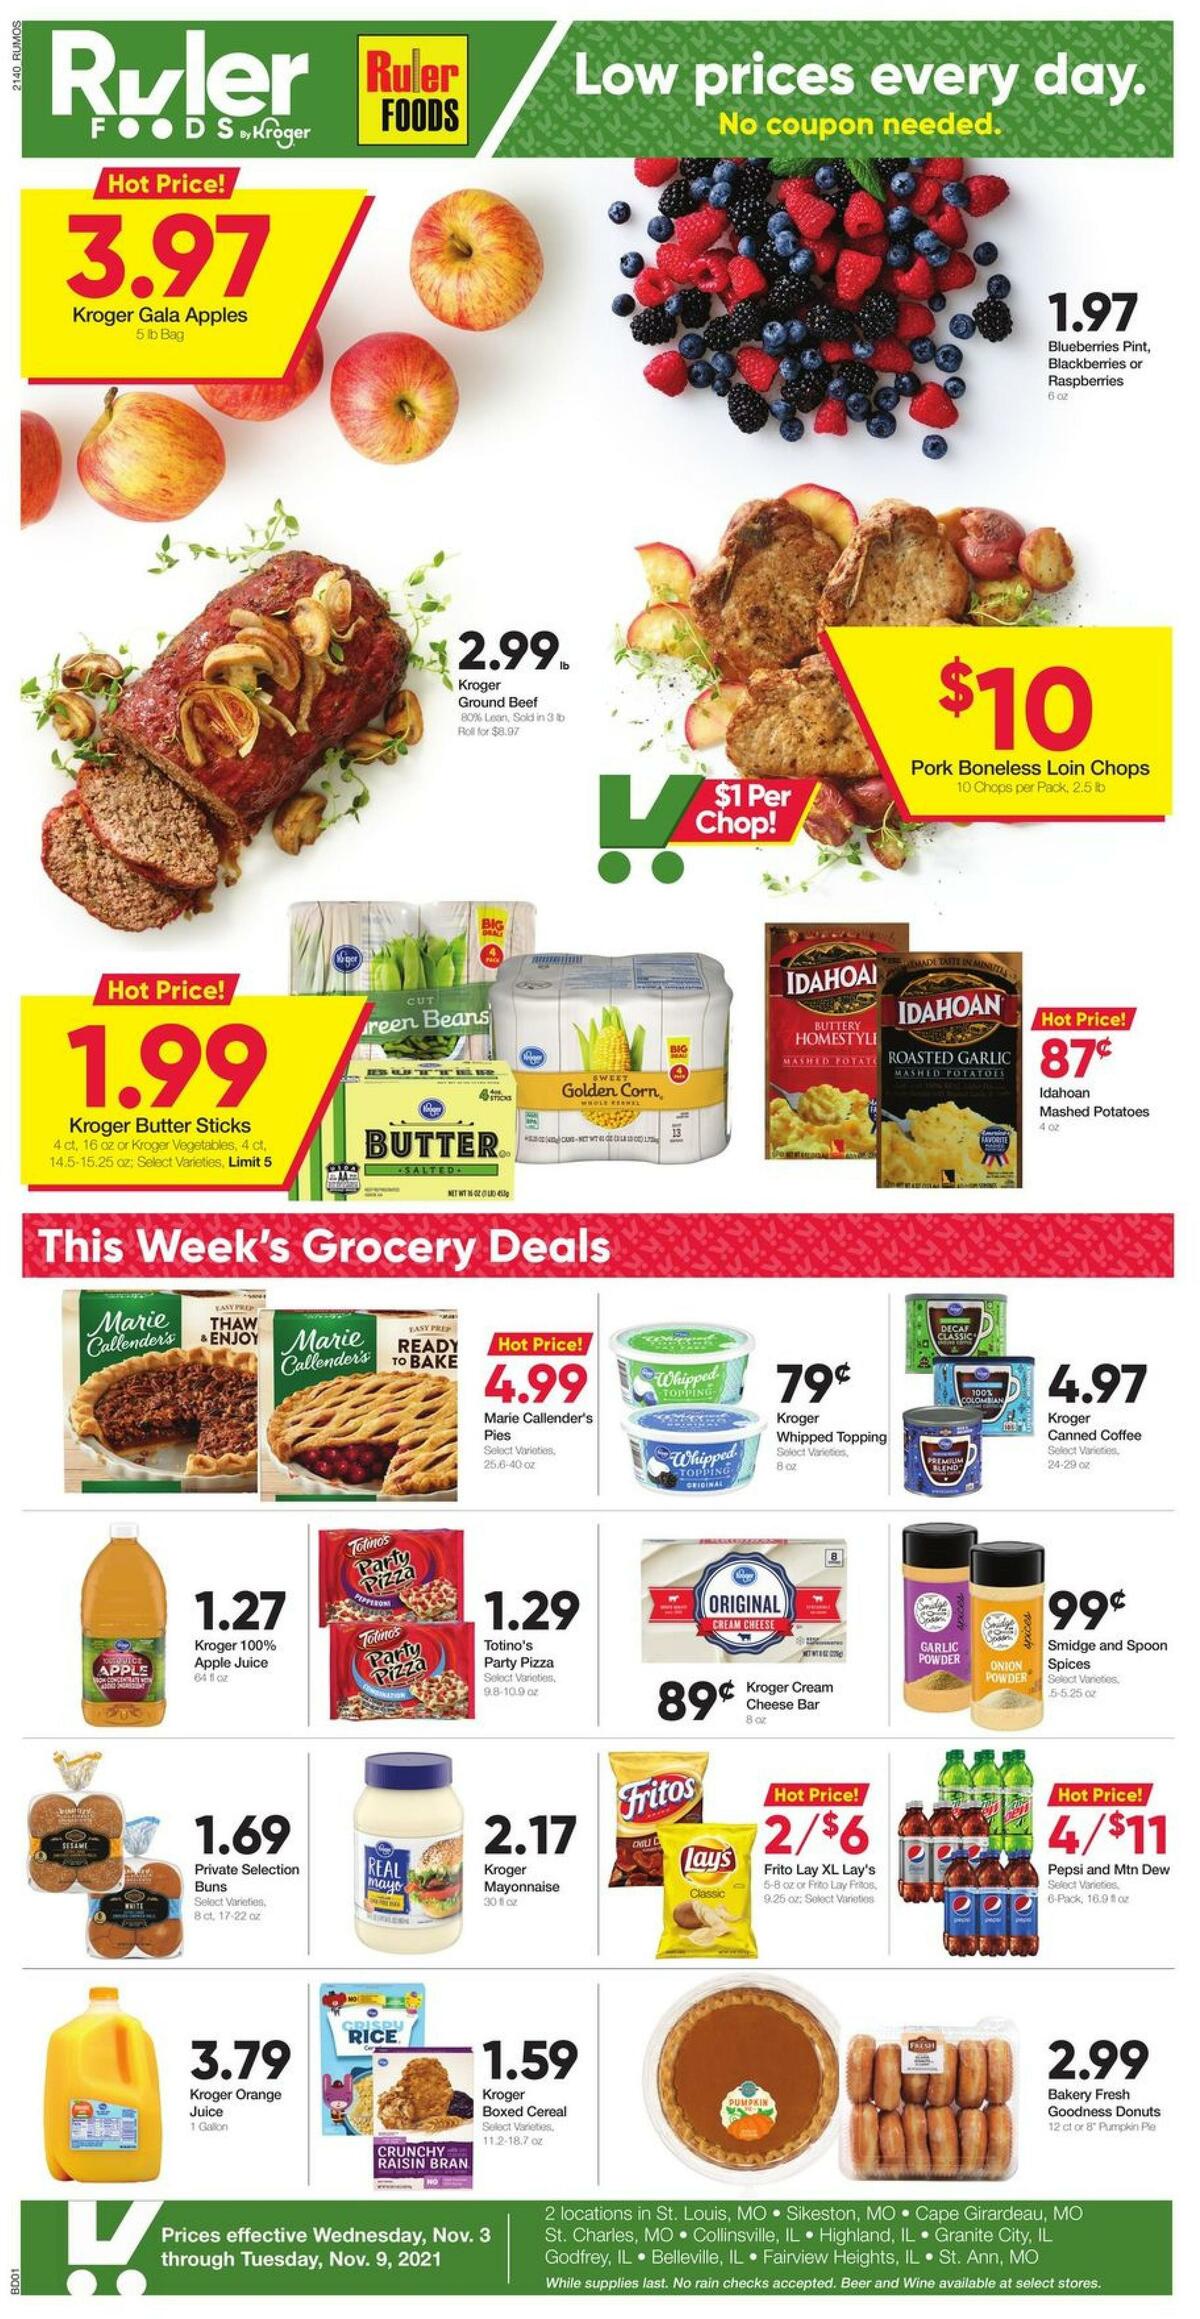 Ruler Foods Weekly Ad from November 3